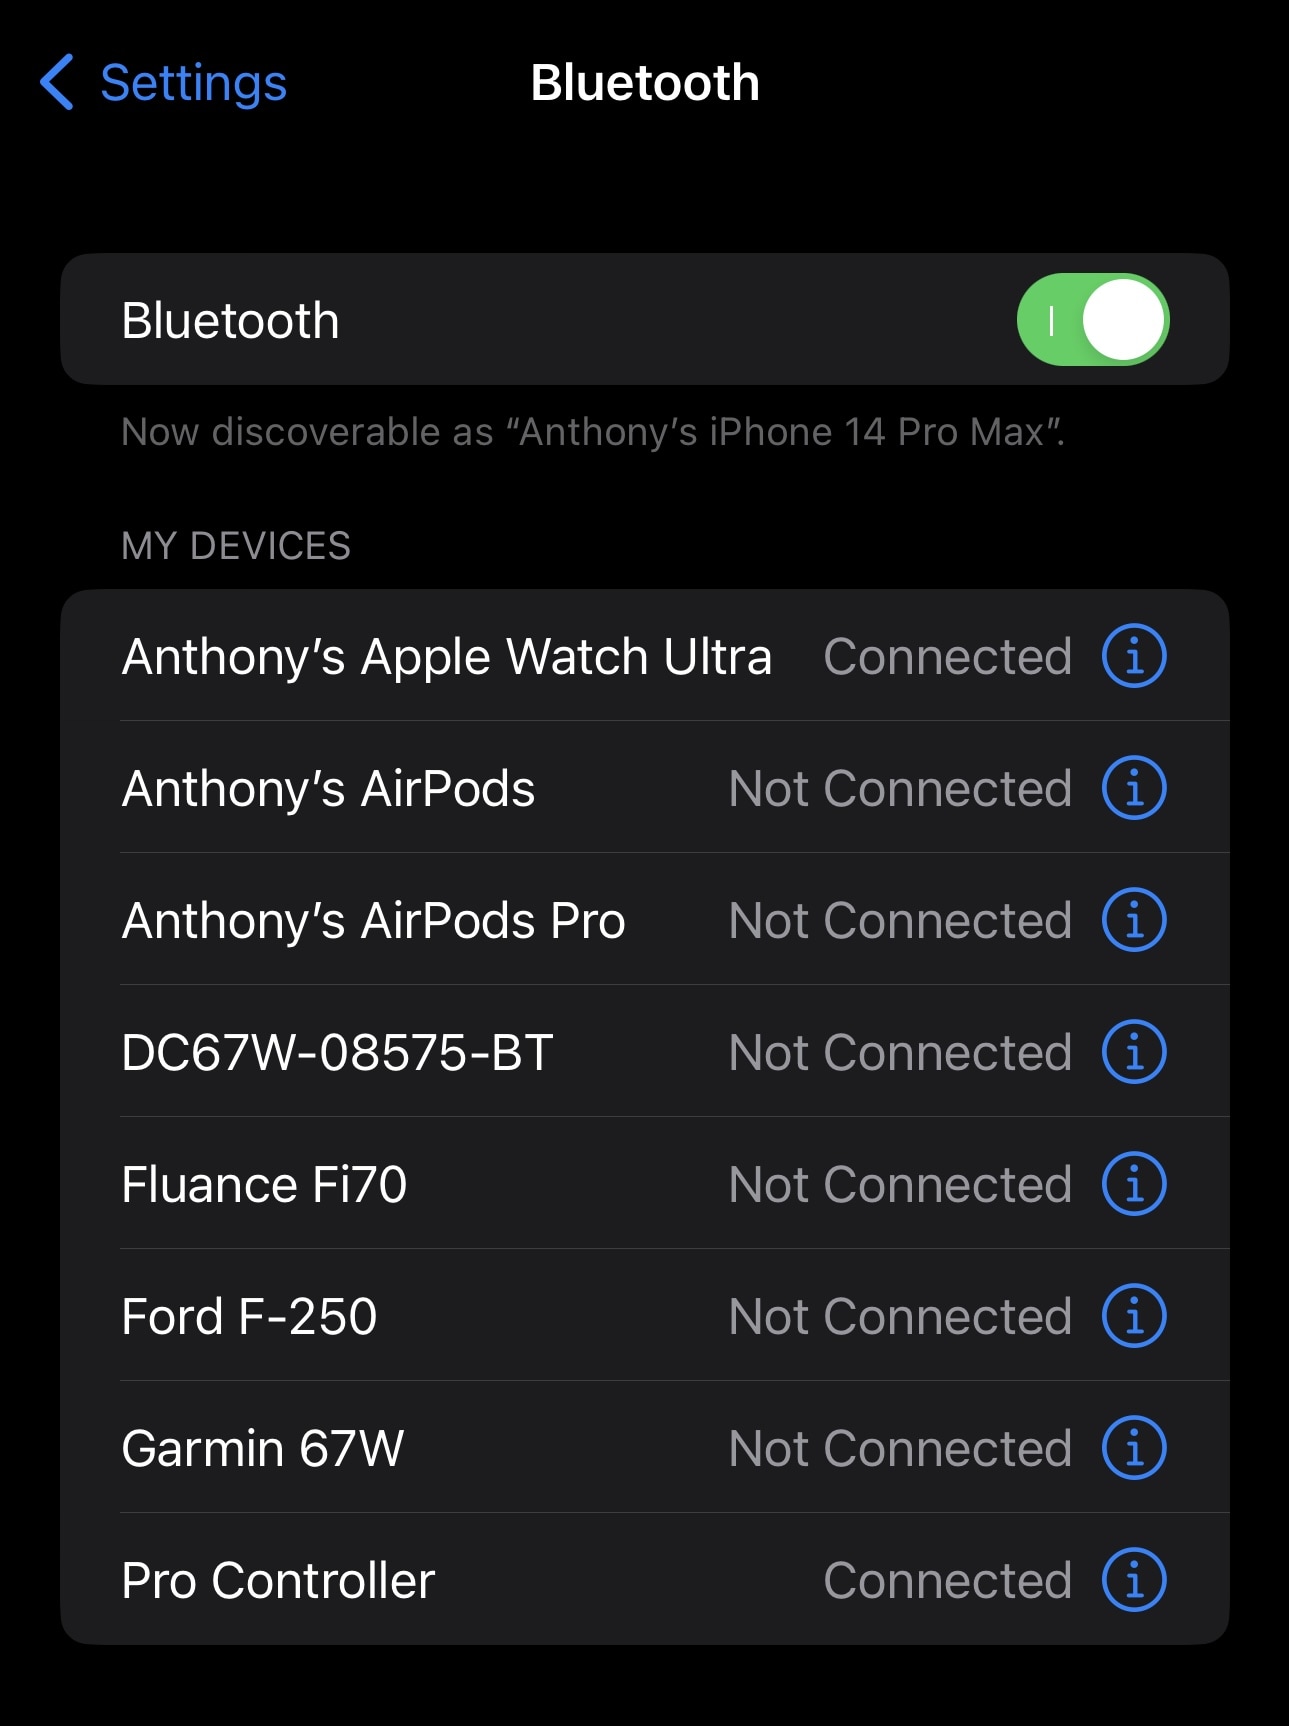 Nintendo Switch Pro Controller connected to iPhone.